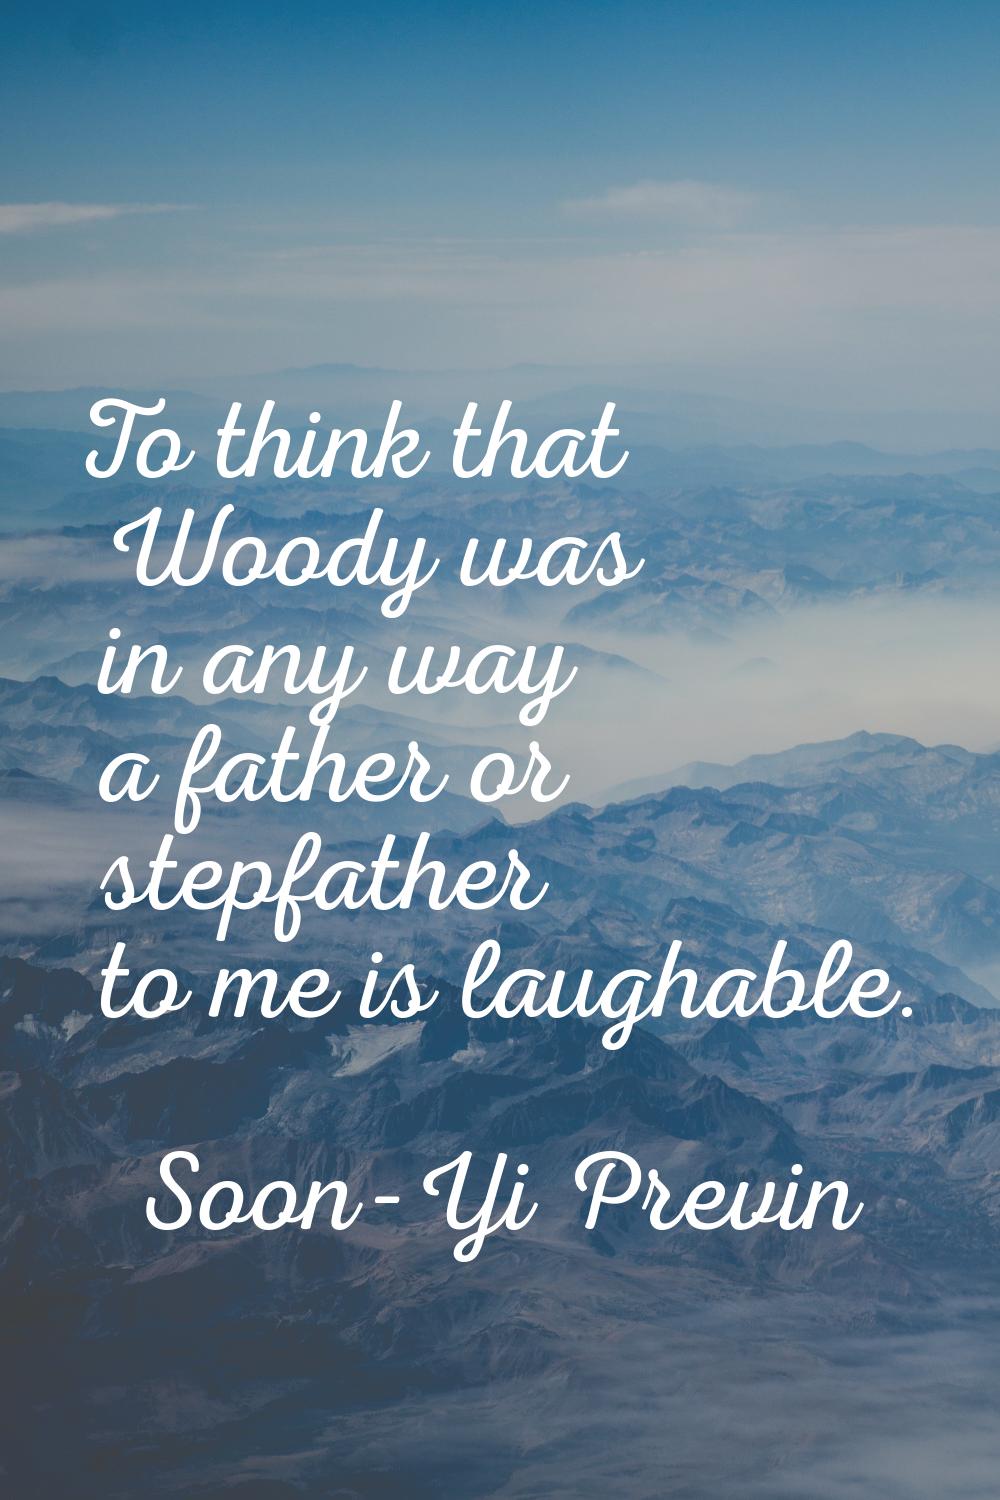 To think that Woody was in any way a father or stepfather to me is laughable.